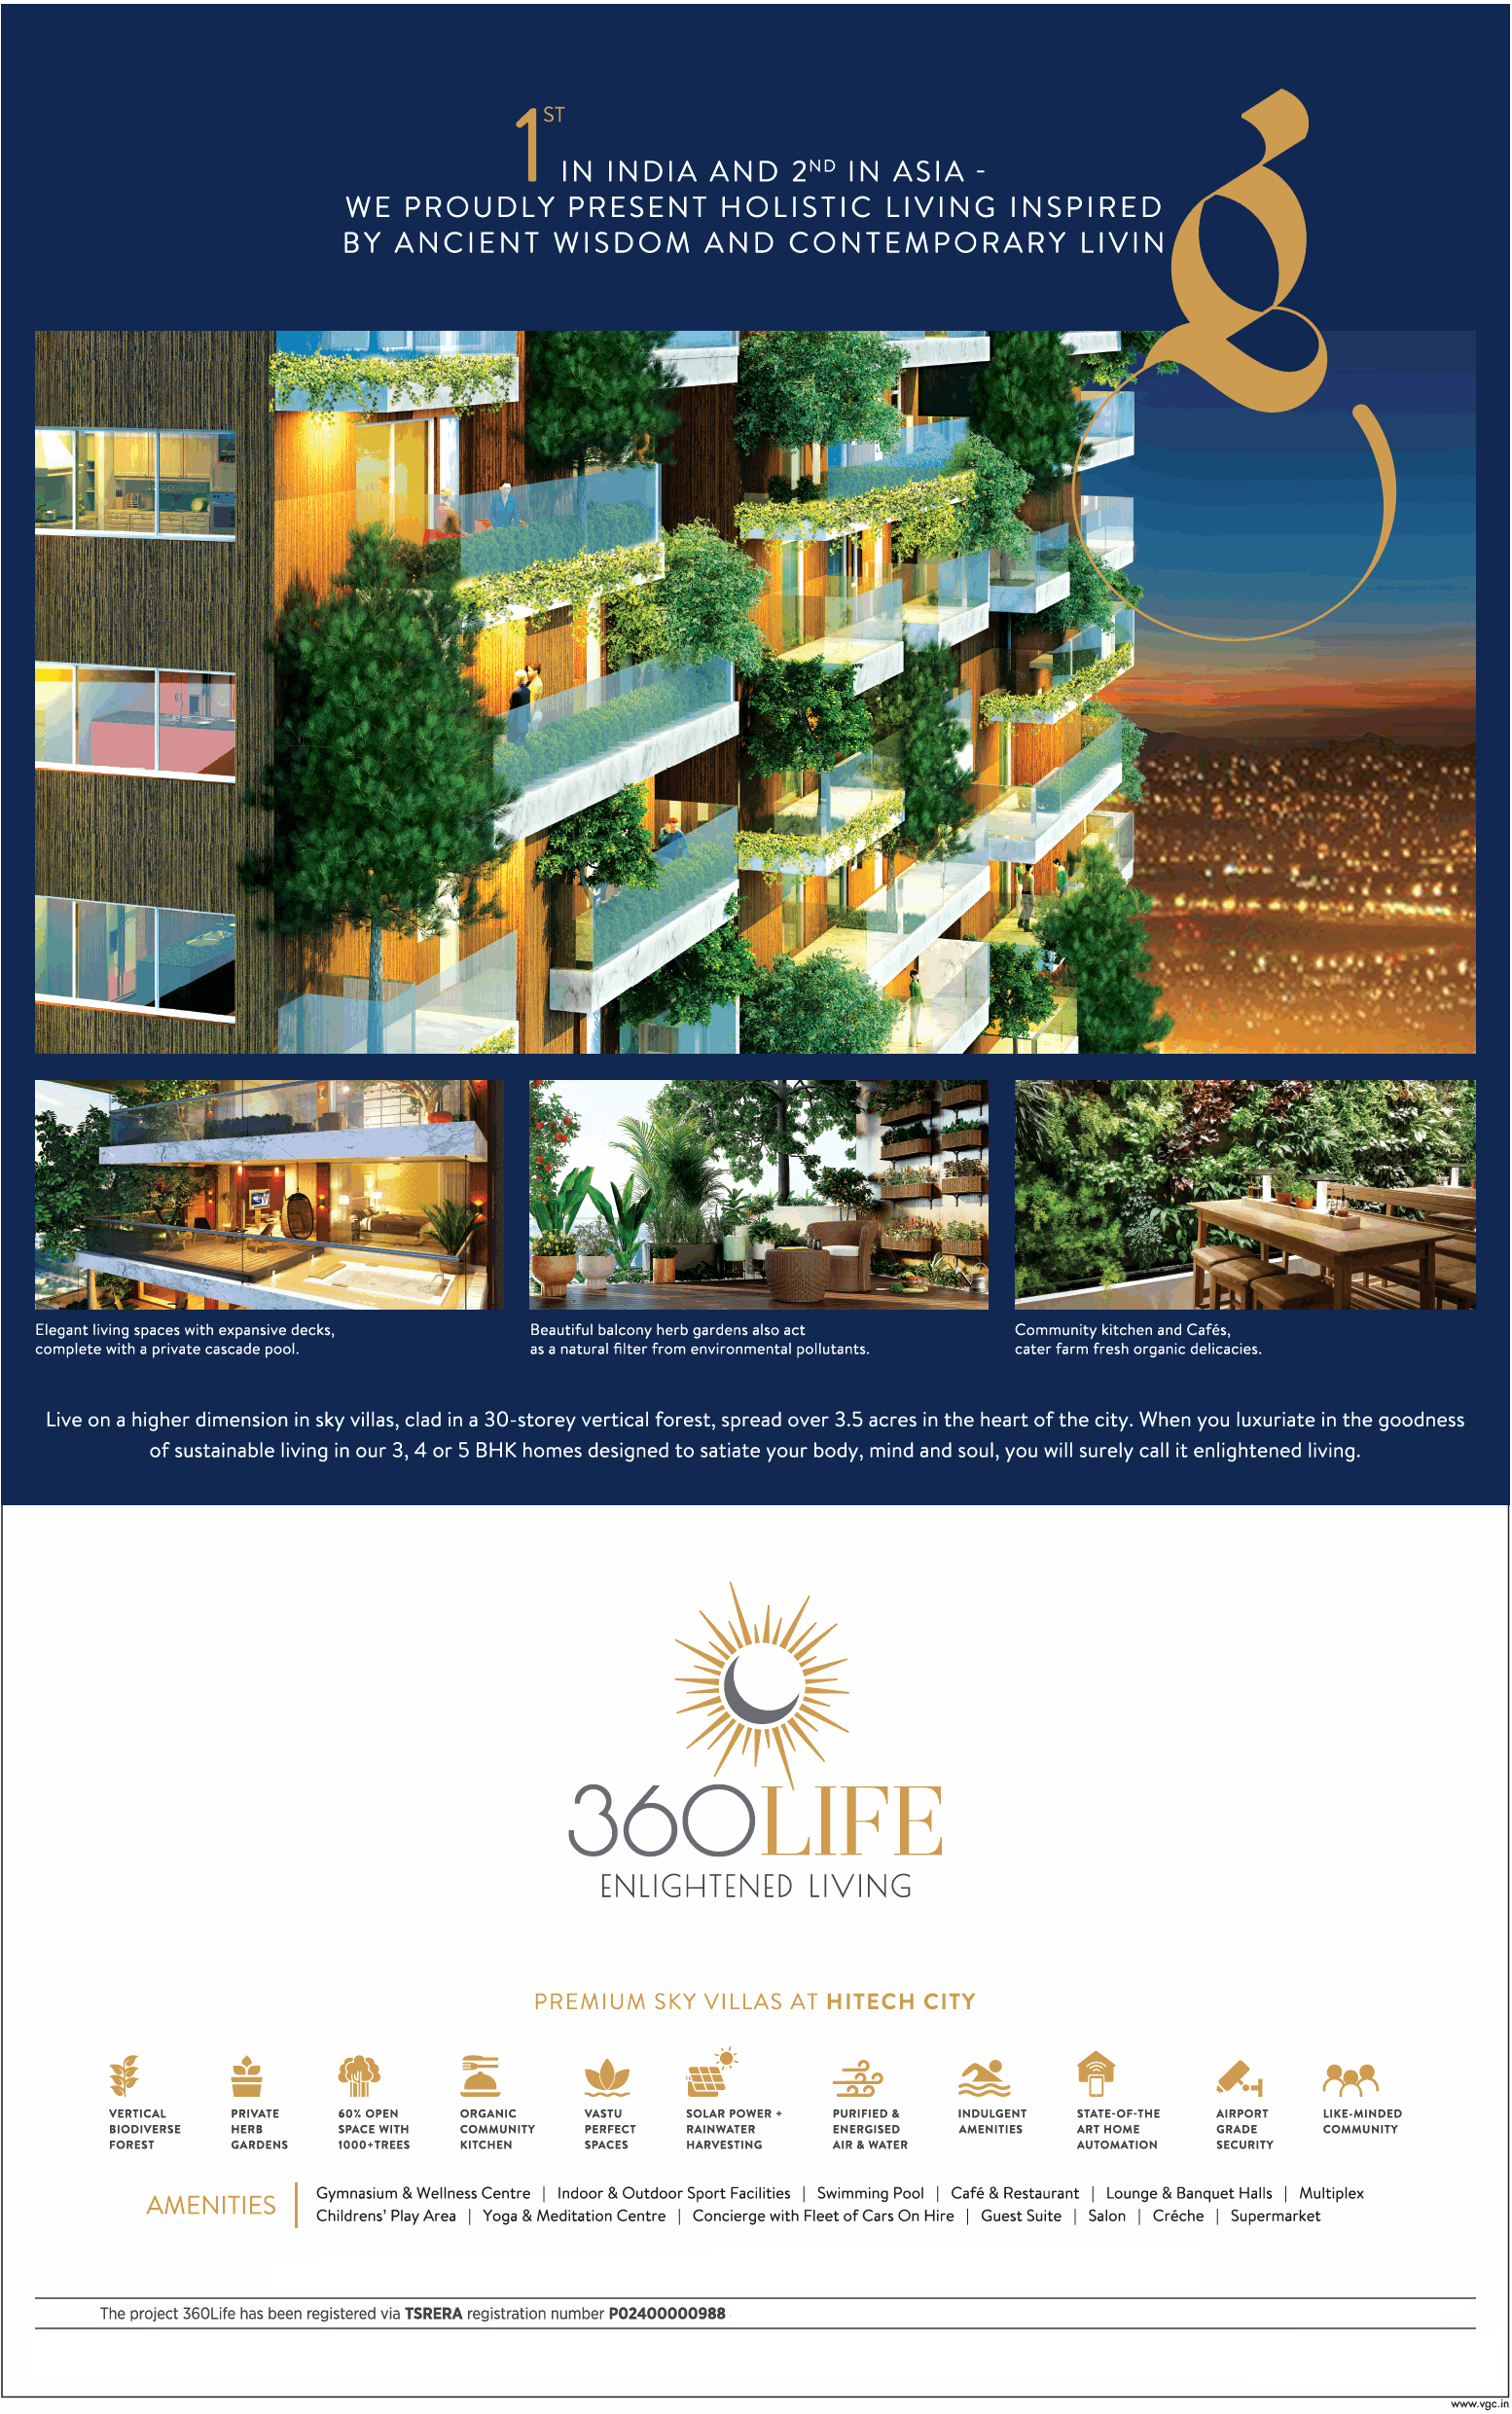 Presenting holistic living at 360 Life Enlightened Living, Hyderabad Update